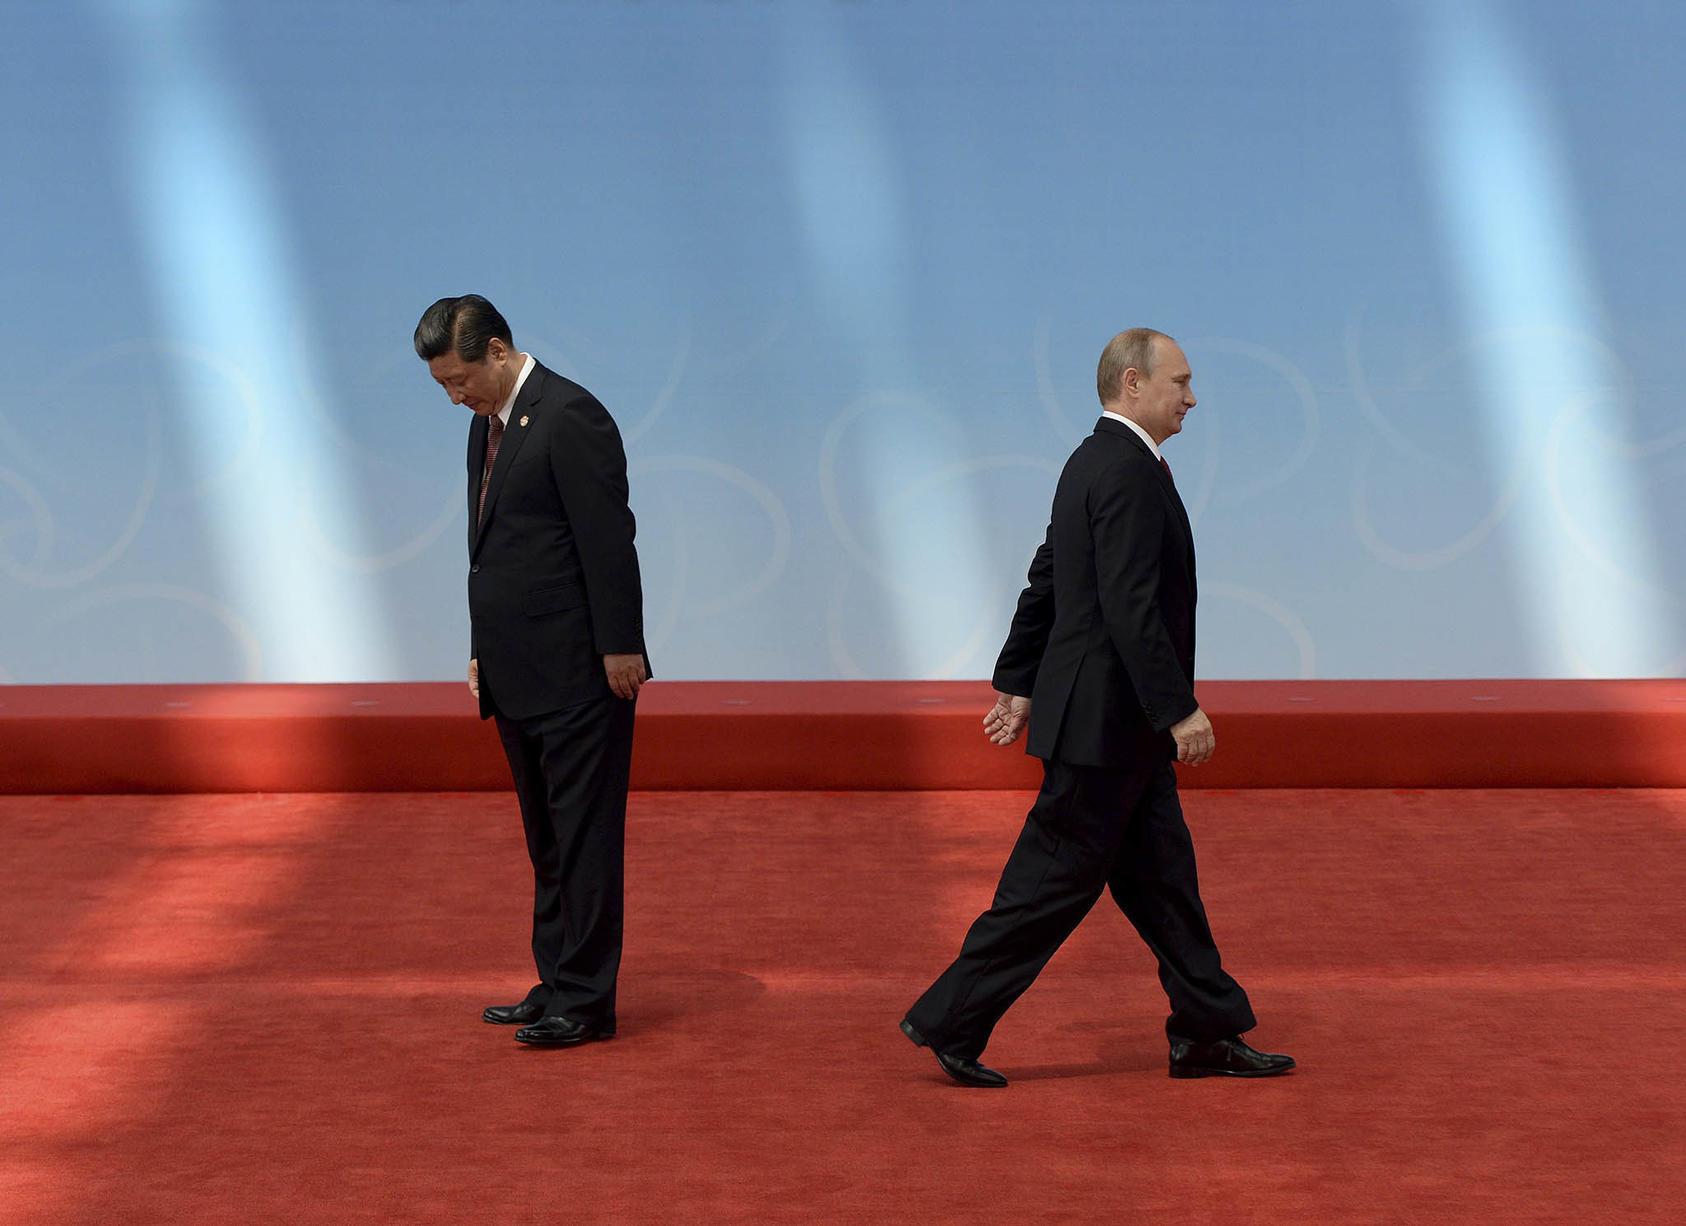 Russian President Vladimir Putin leaves after being greeted by Chinese President Xi Jinping in Shanghai, China. May 21, 2014. (Mark Ralston/Pool via The New York Times)